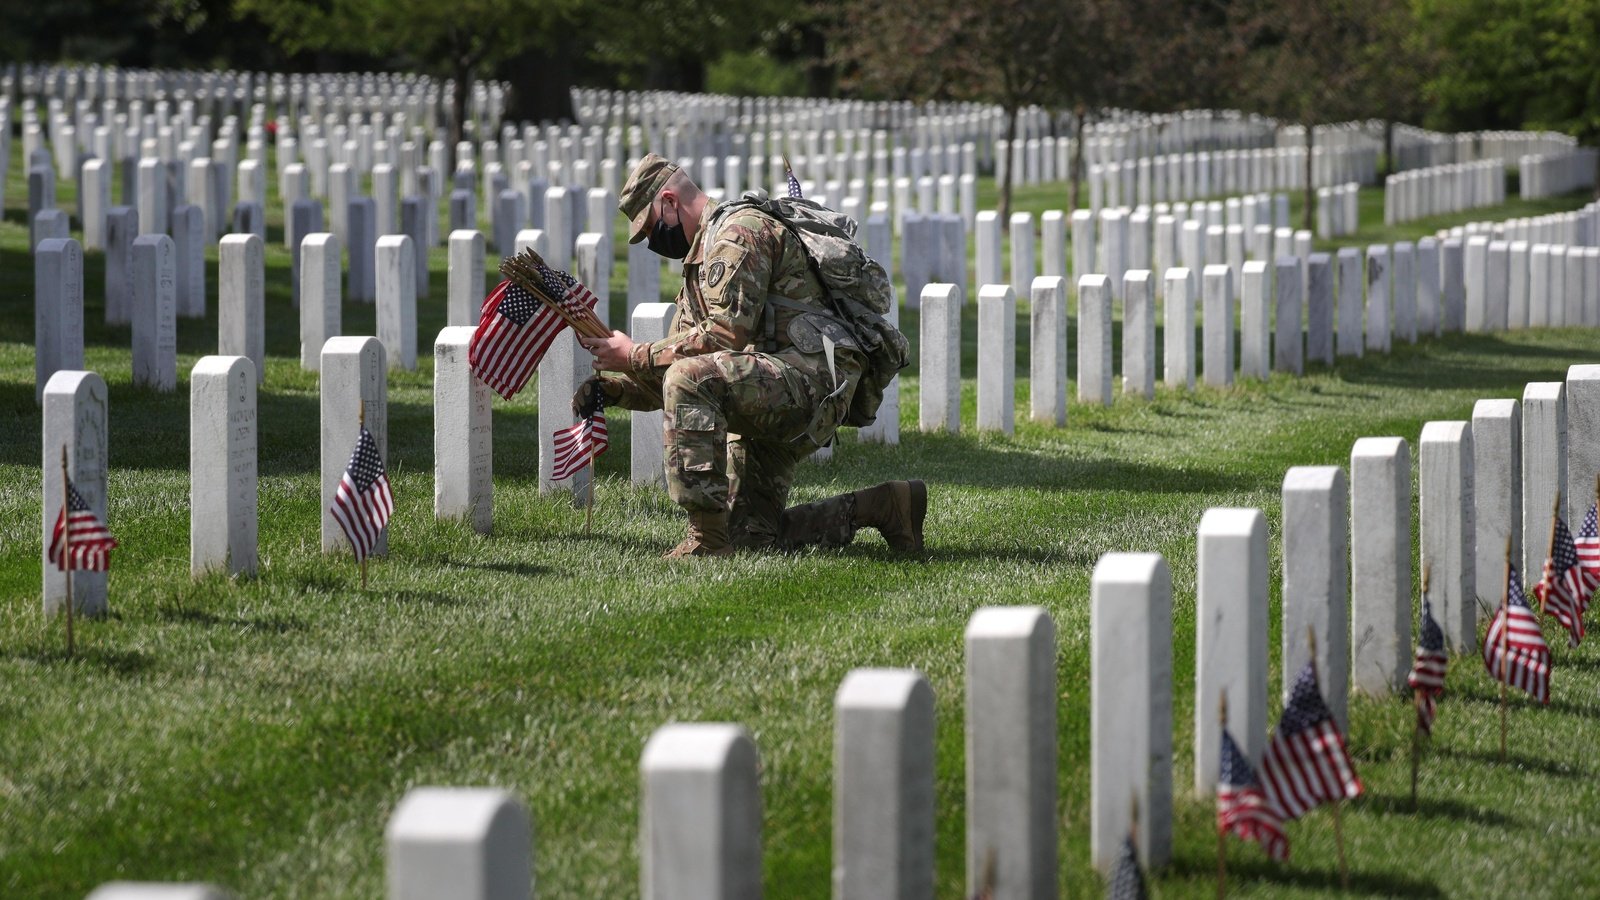 Remembering Those Whom Memorial Day Honors | Council on Foreign Relations